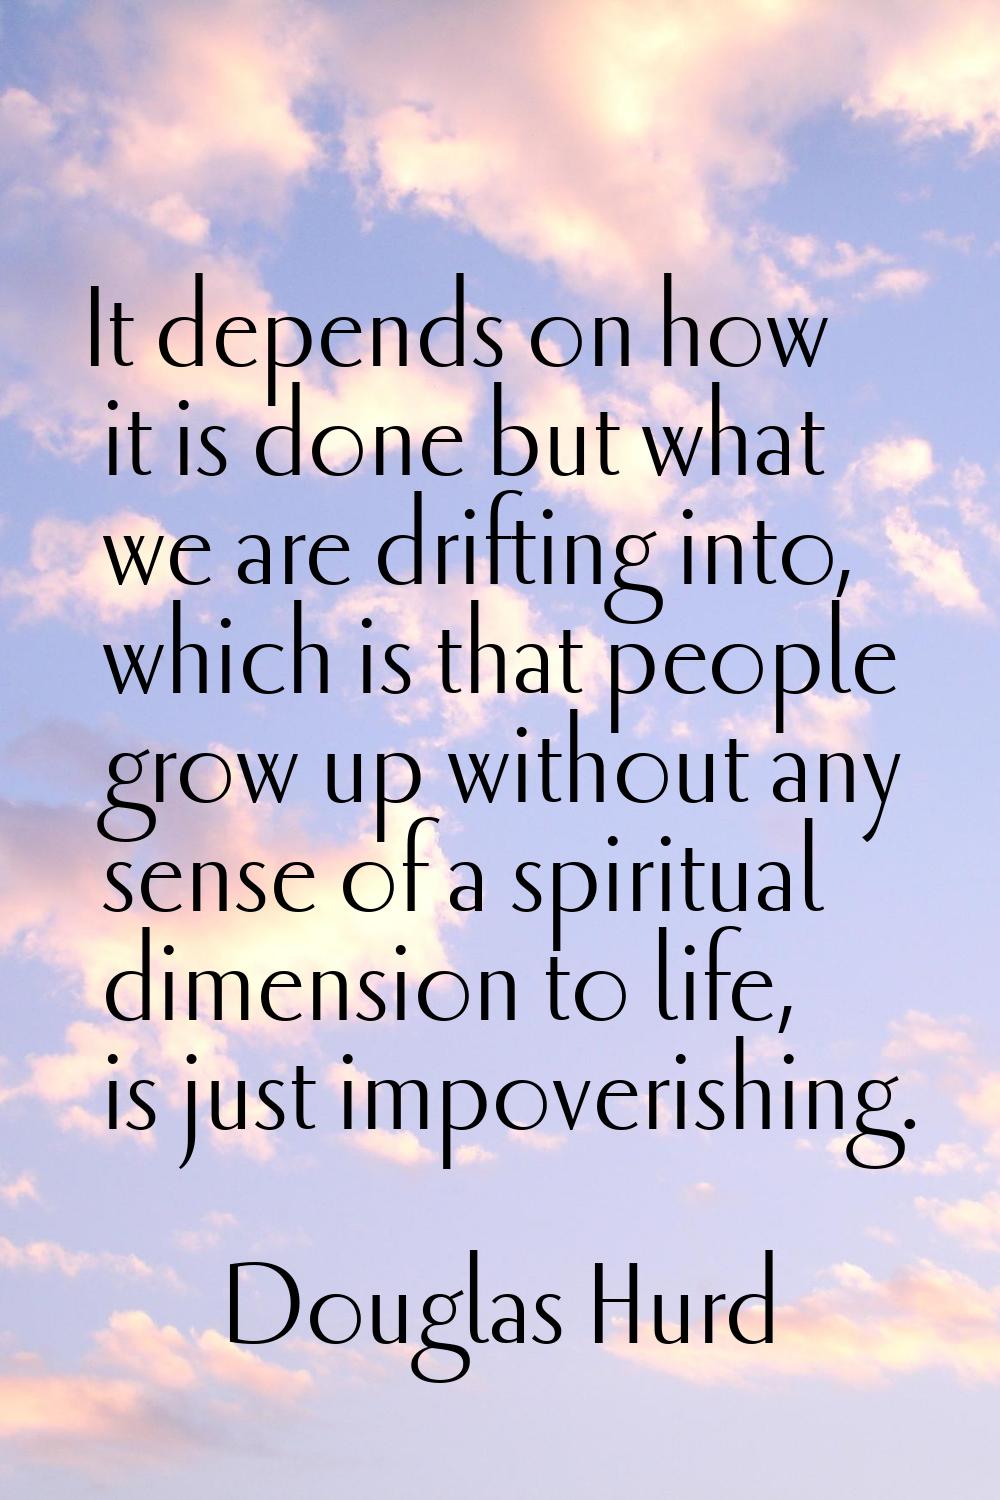 It depends on how it is done but what we are drifting into, which is that people grow up without an